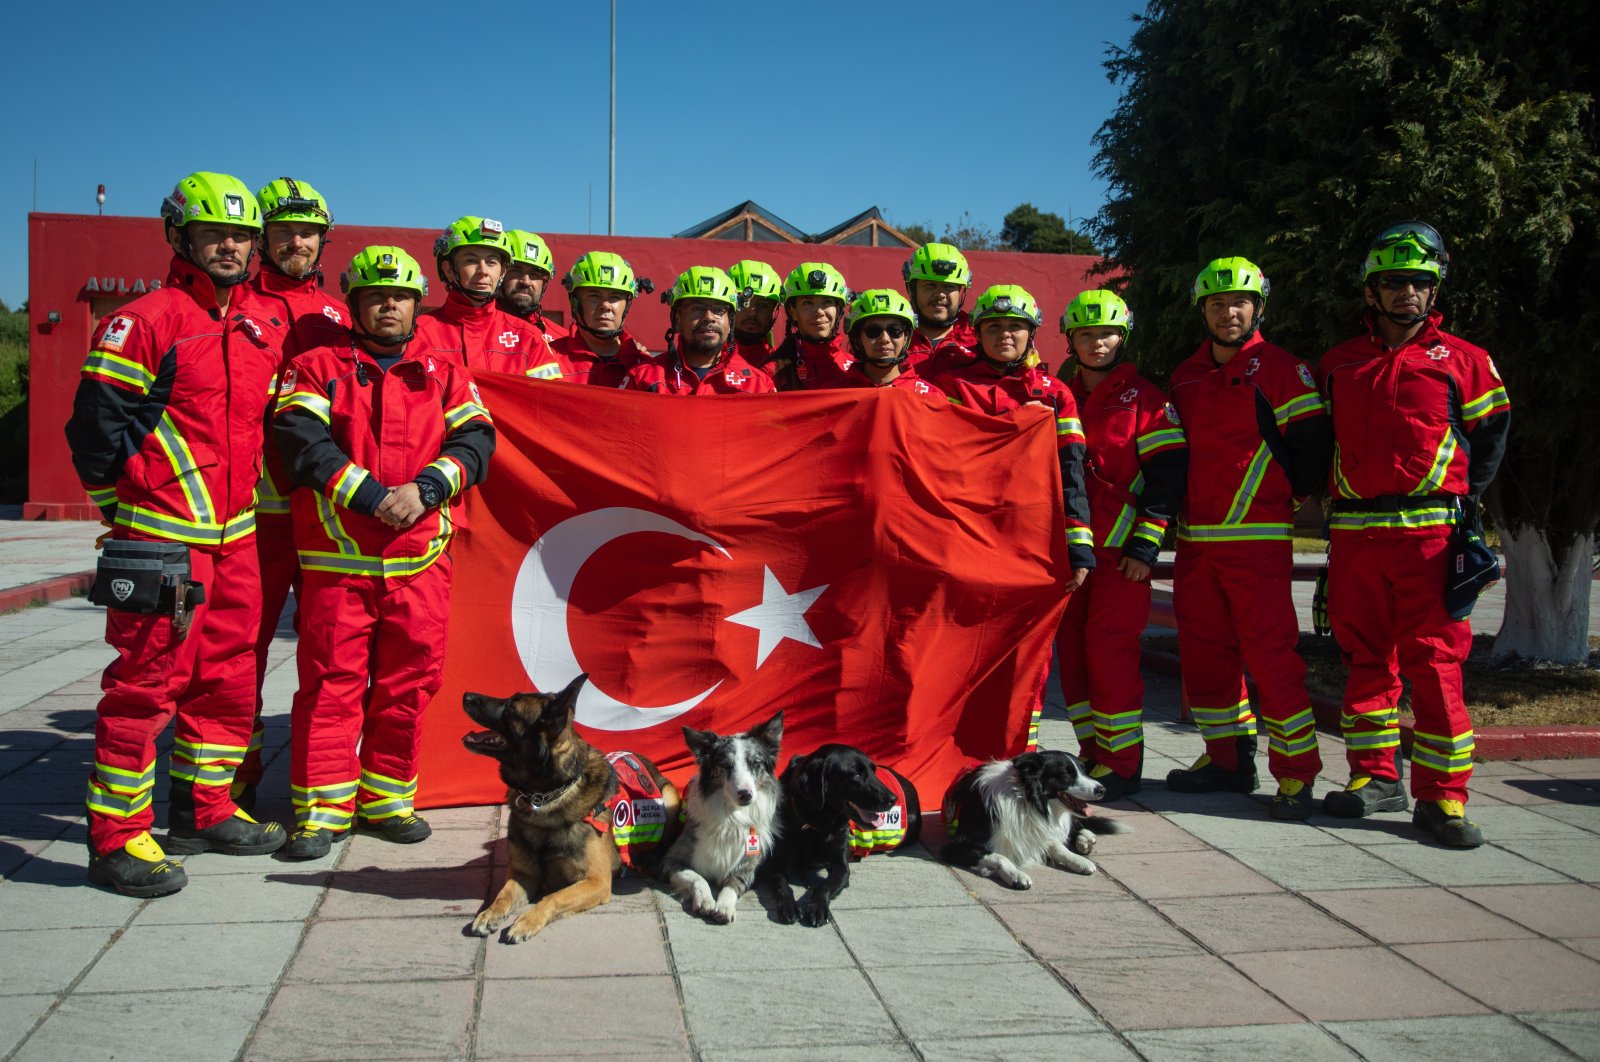 Mexican search and rescue team, who came to Türkiye after the earthquakes that hit 10 cities in the south of the country, poses with the Turkish flag, Feb. 18, 2023. (AA Photo)